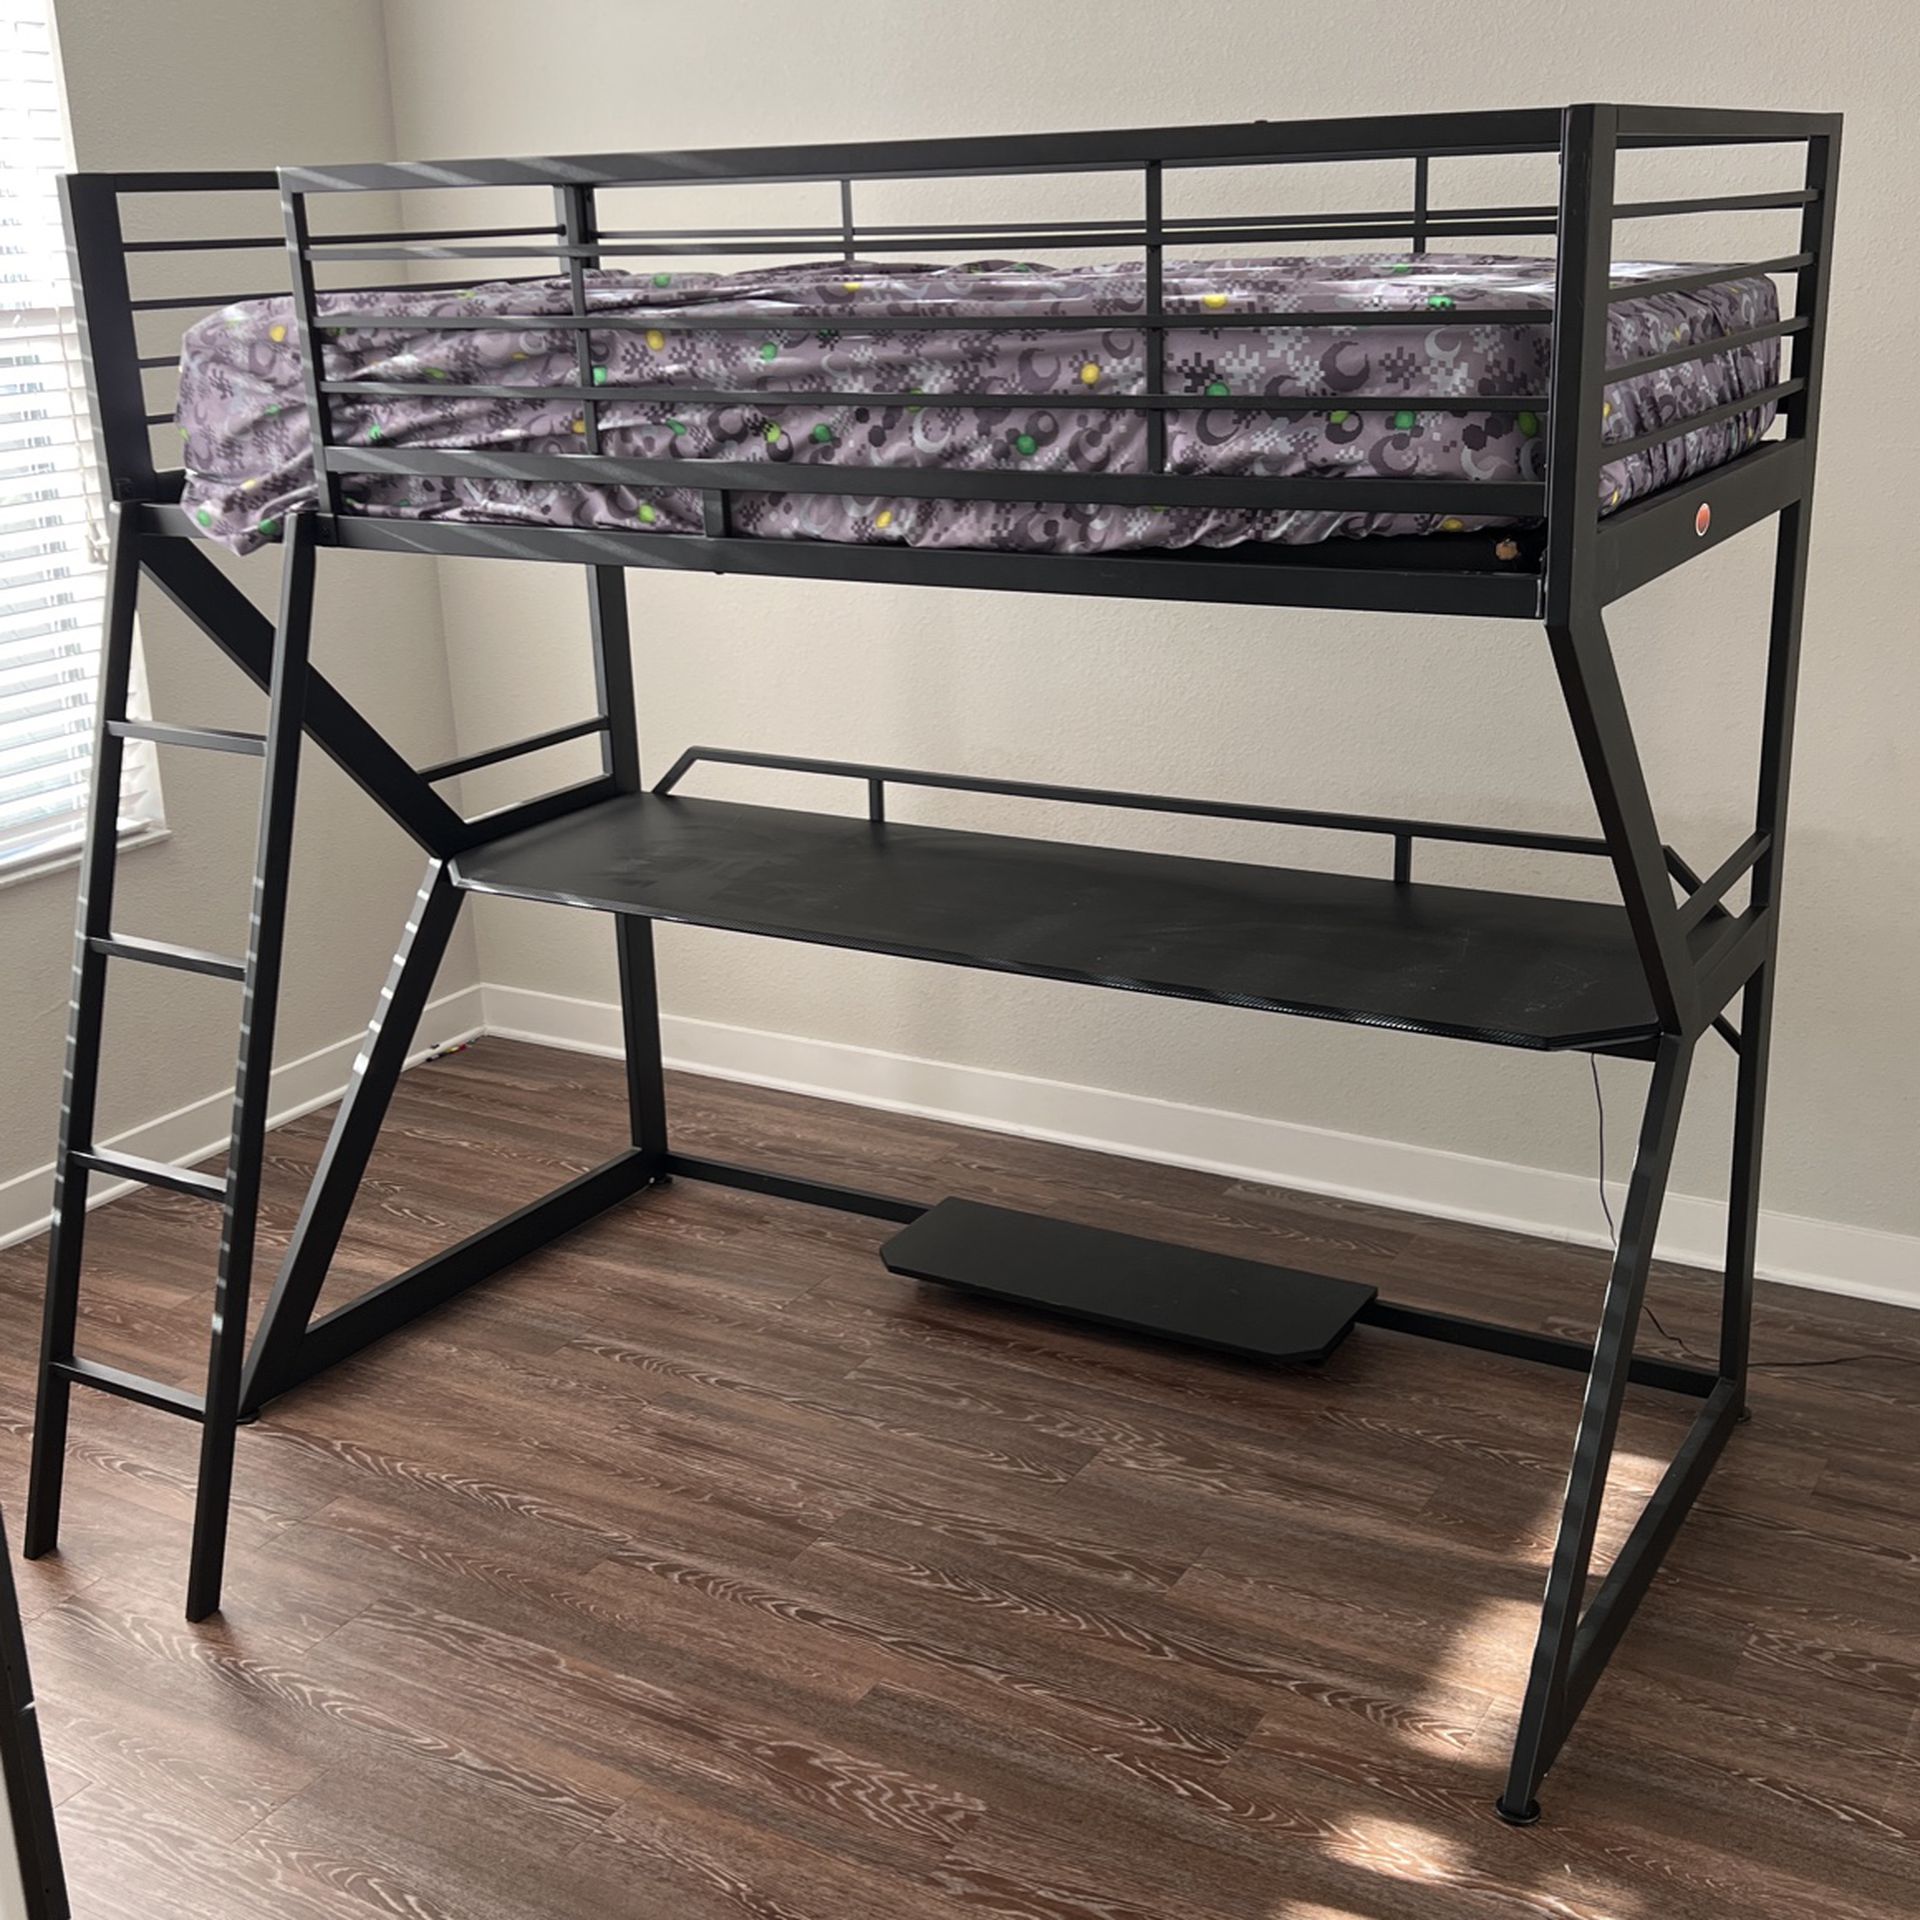 Top Bunk And Desk